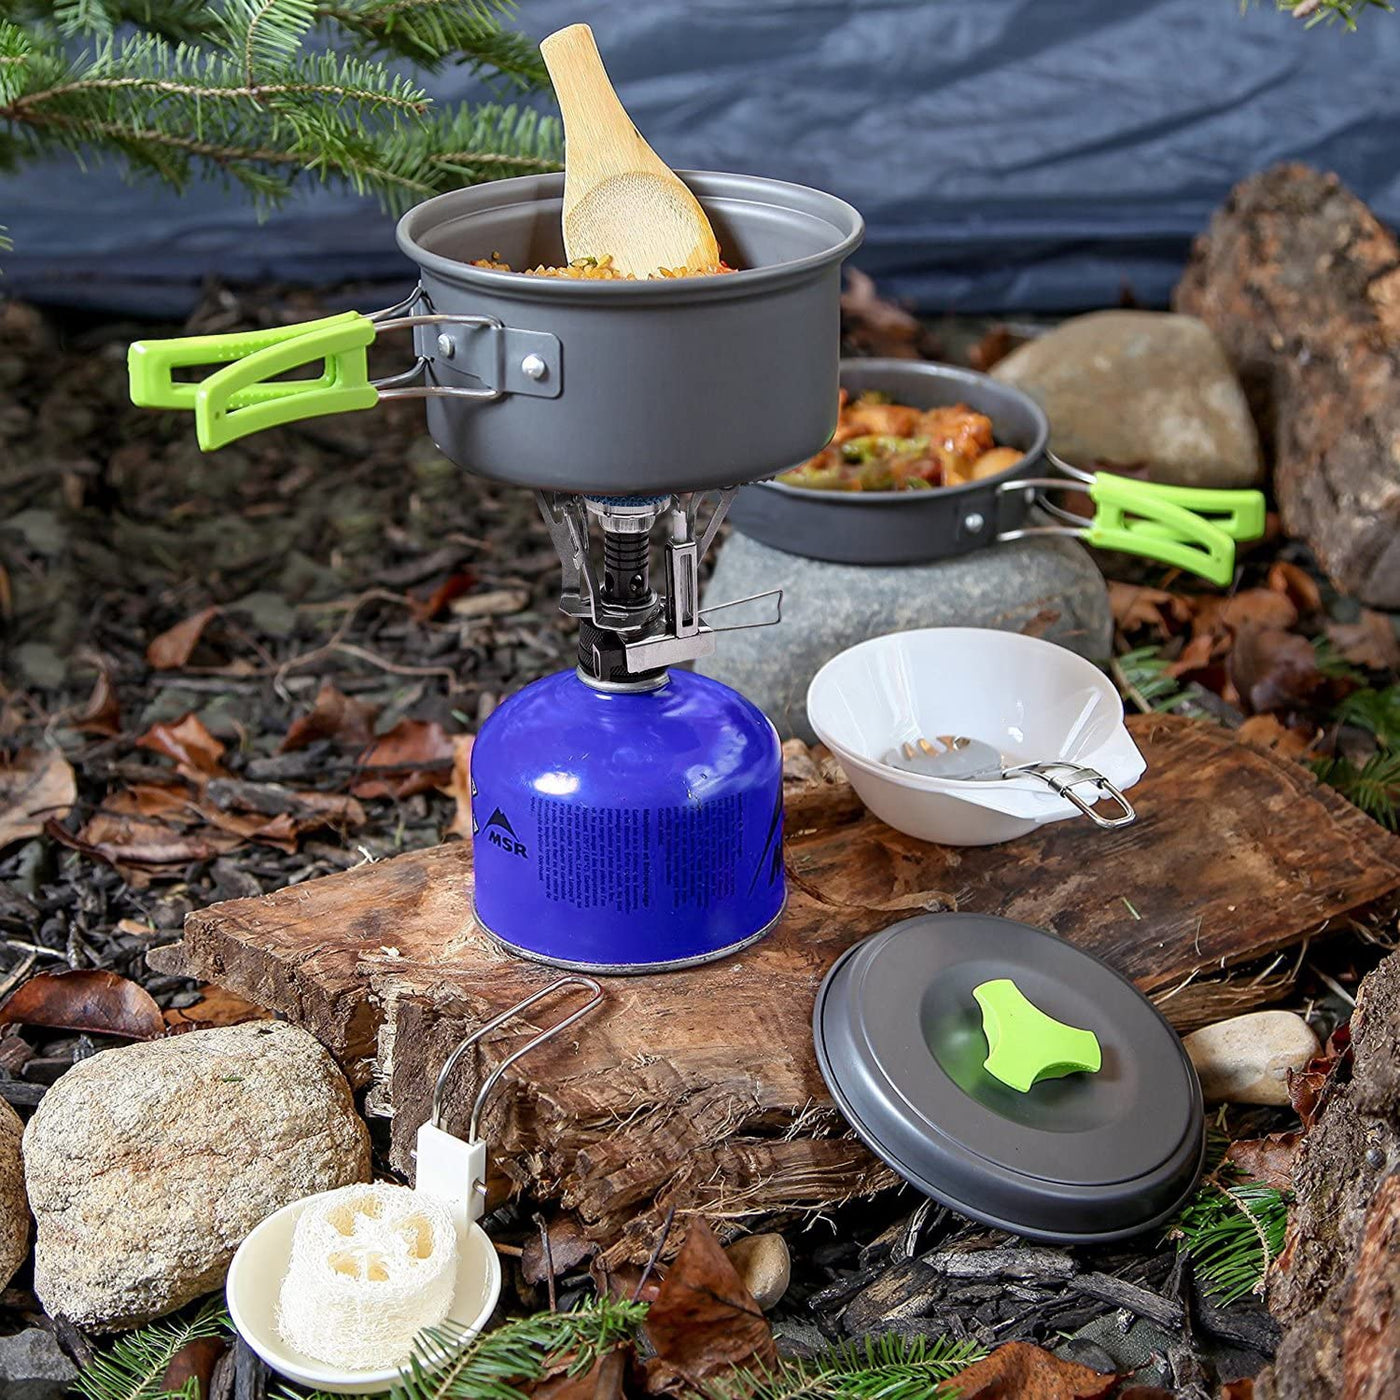 MalloMe Camping Cookware Mess Kit Gear – Camp Accessories Equipment Pots and Pans Set